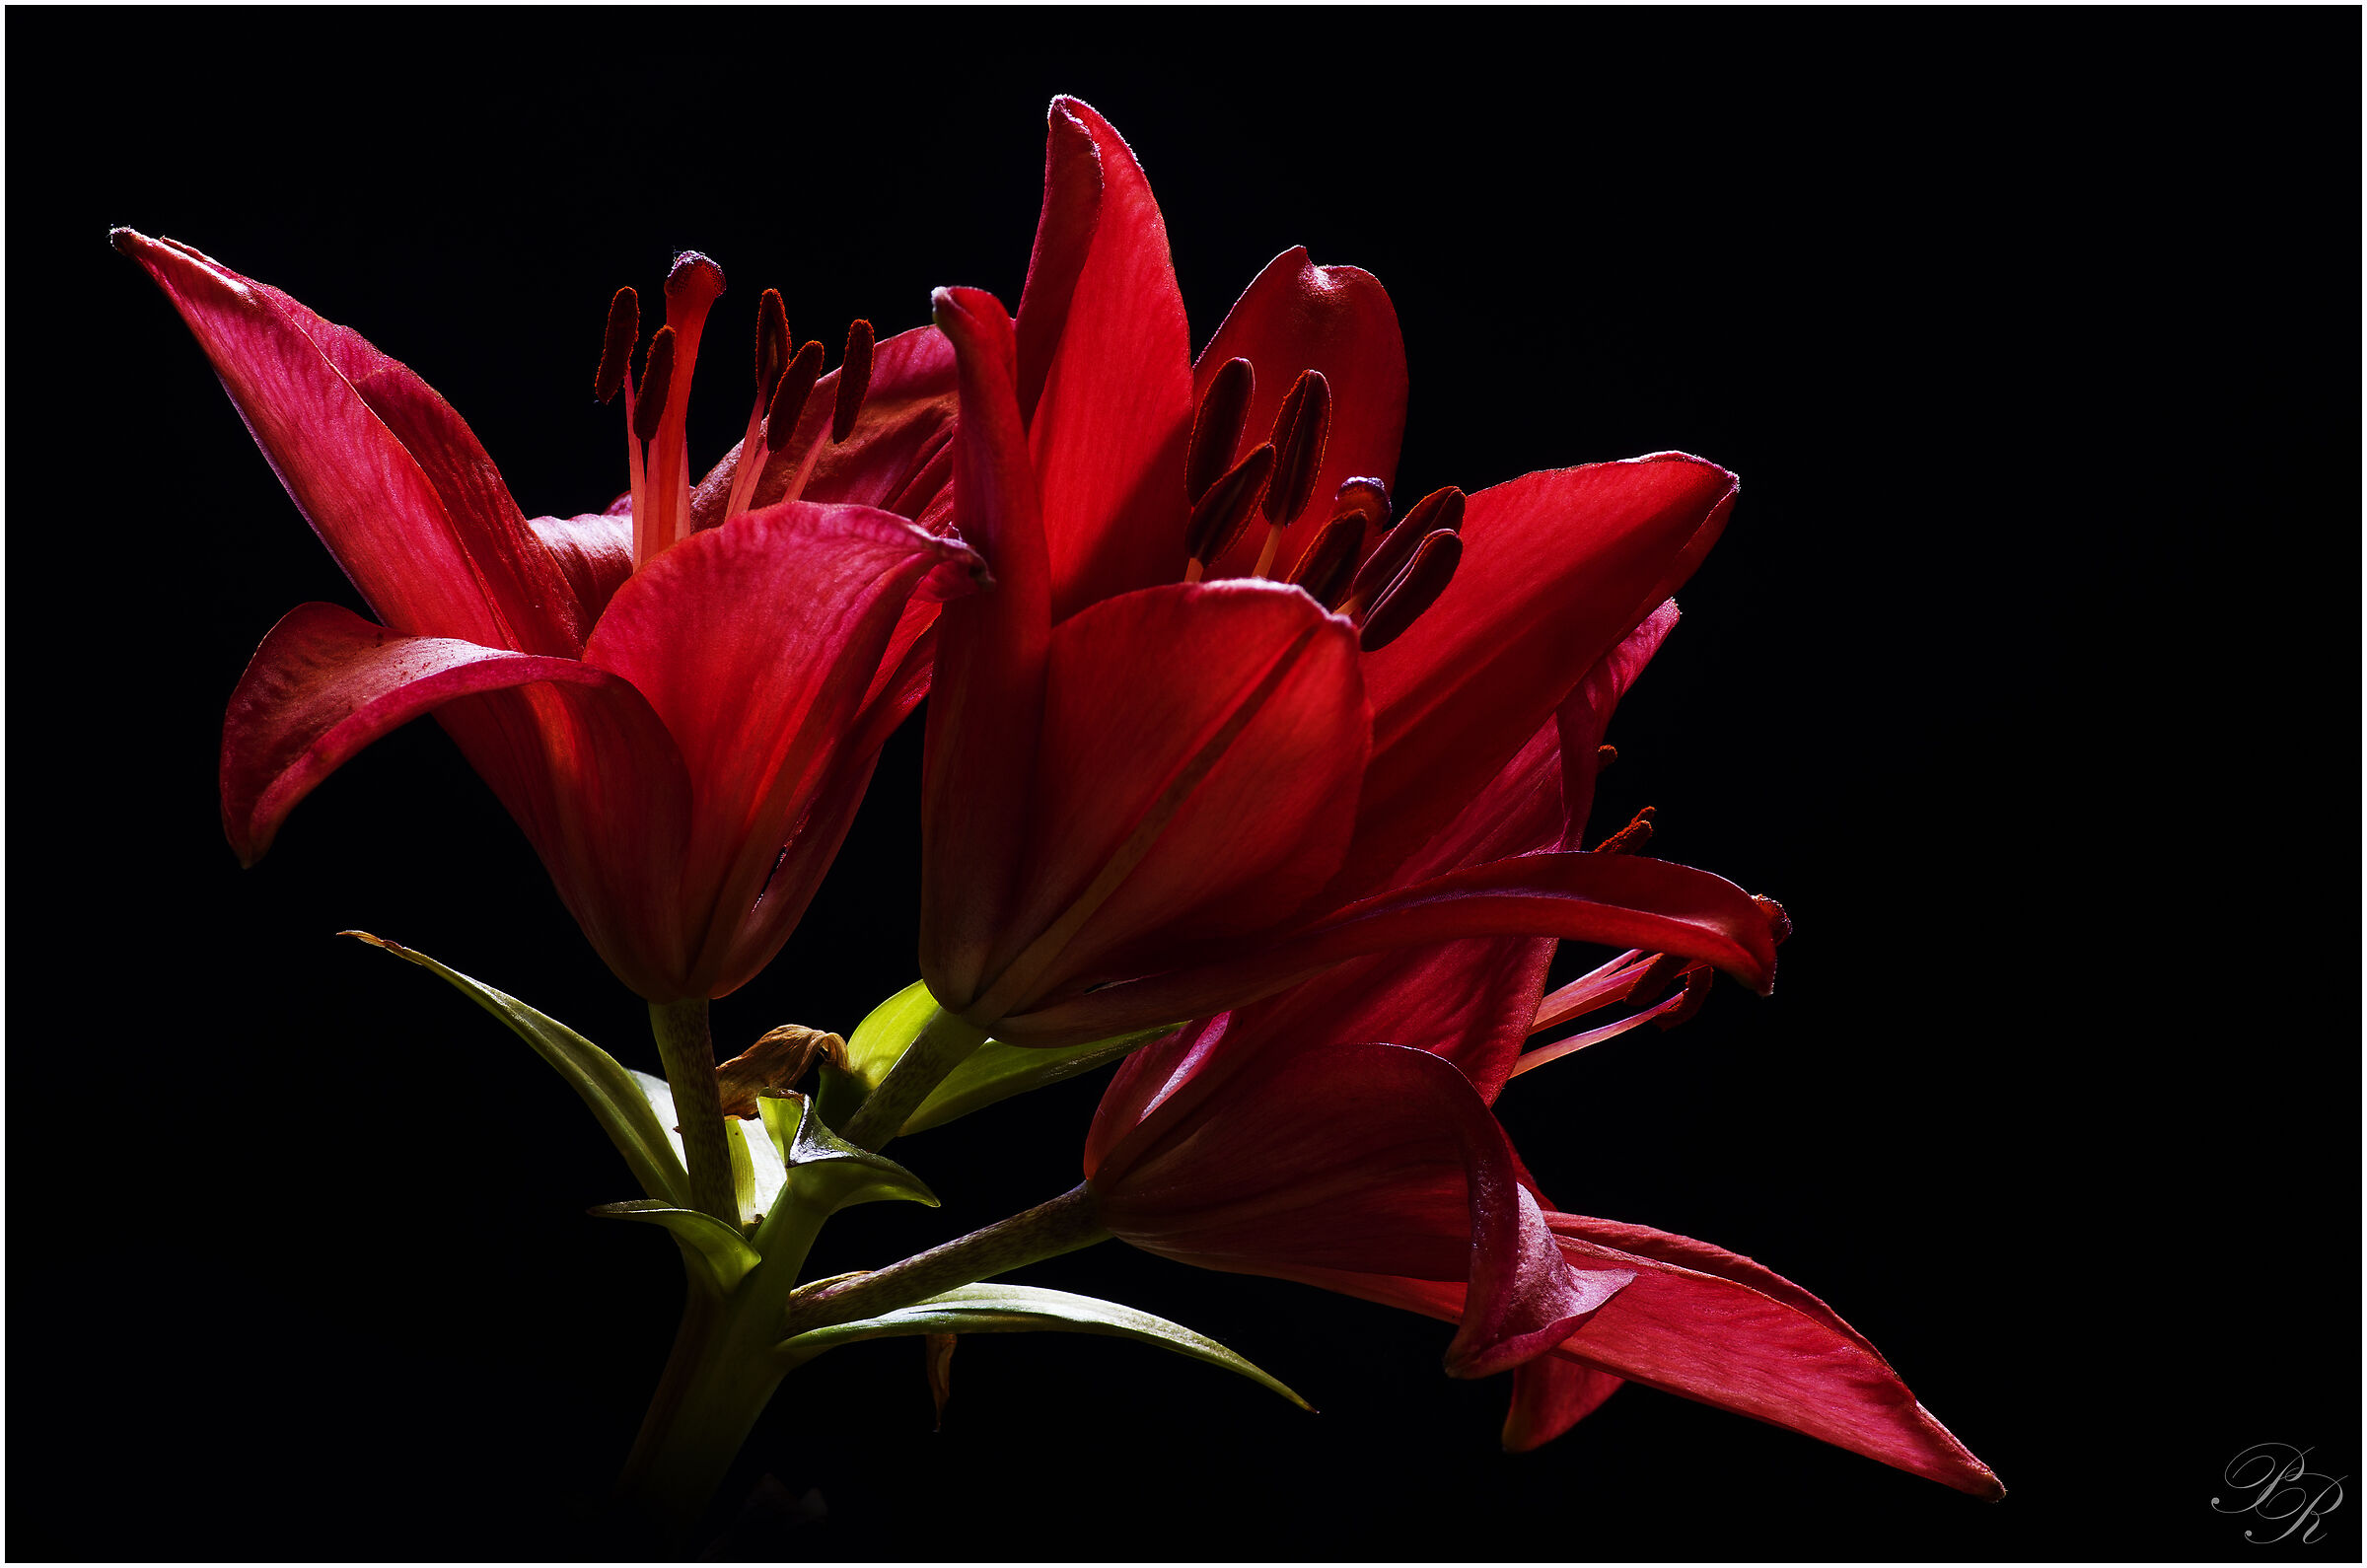 The red lily...